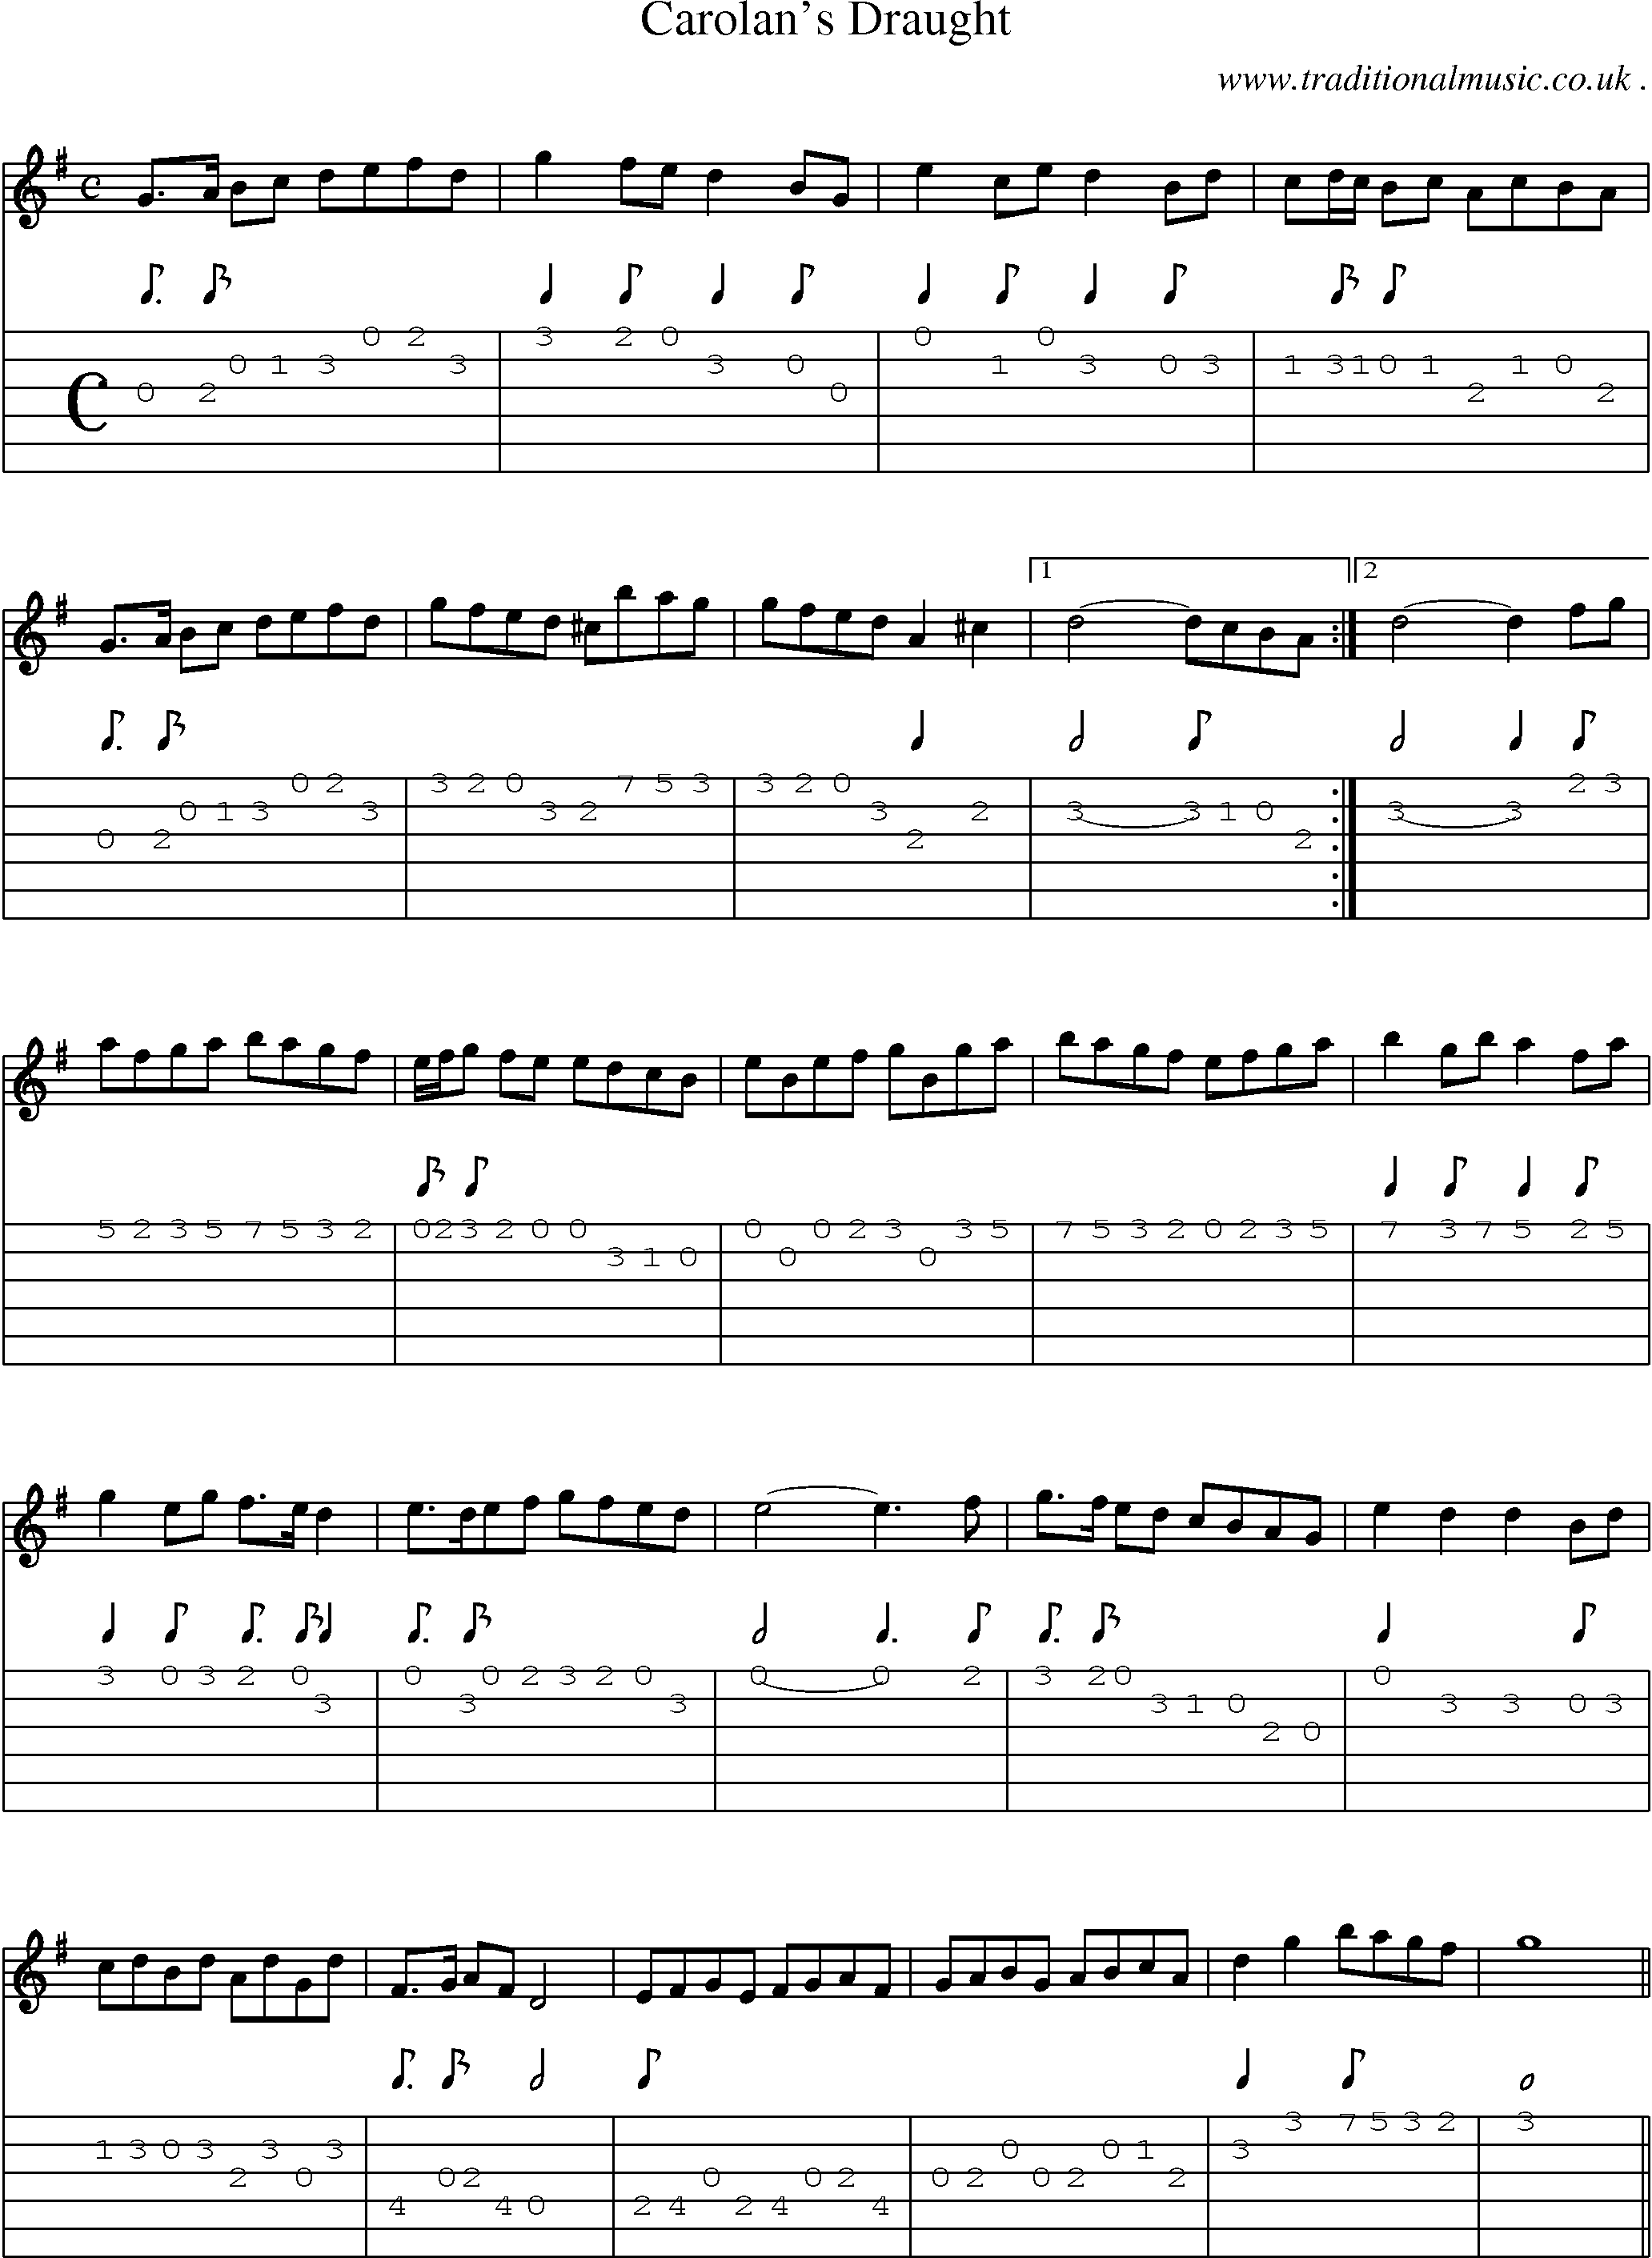 Sheet-Music and Guitar Tabs for Carolans Draught